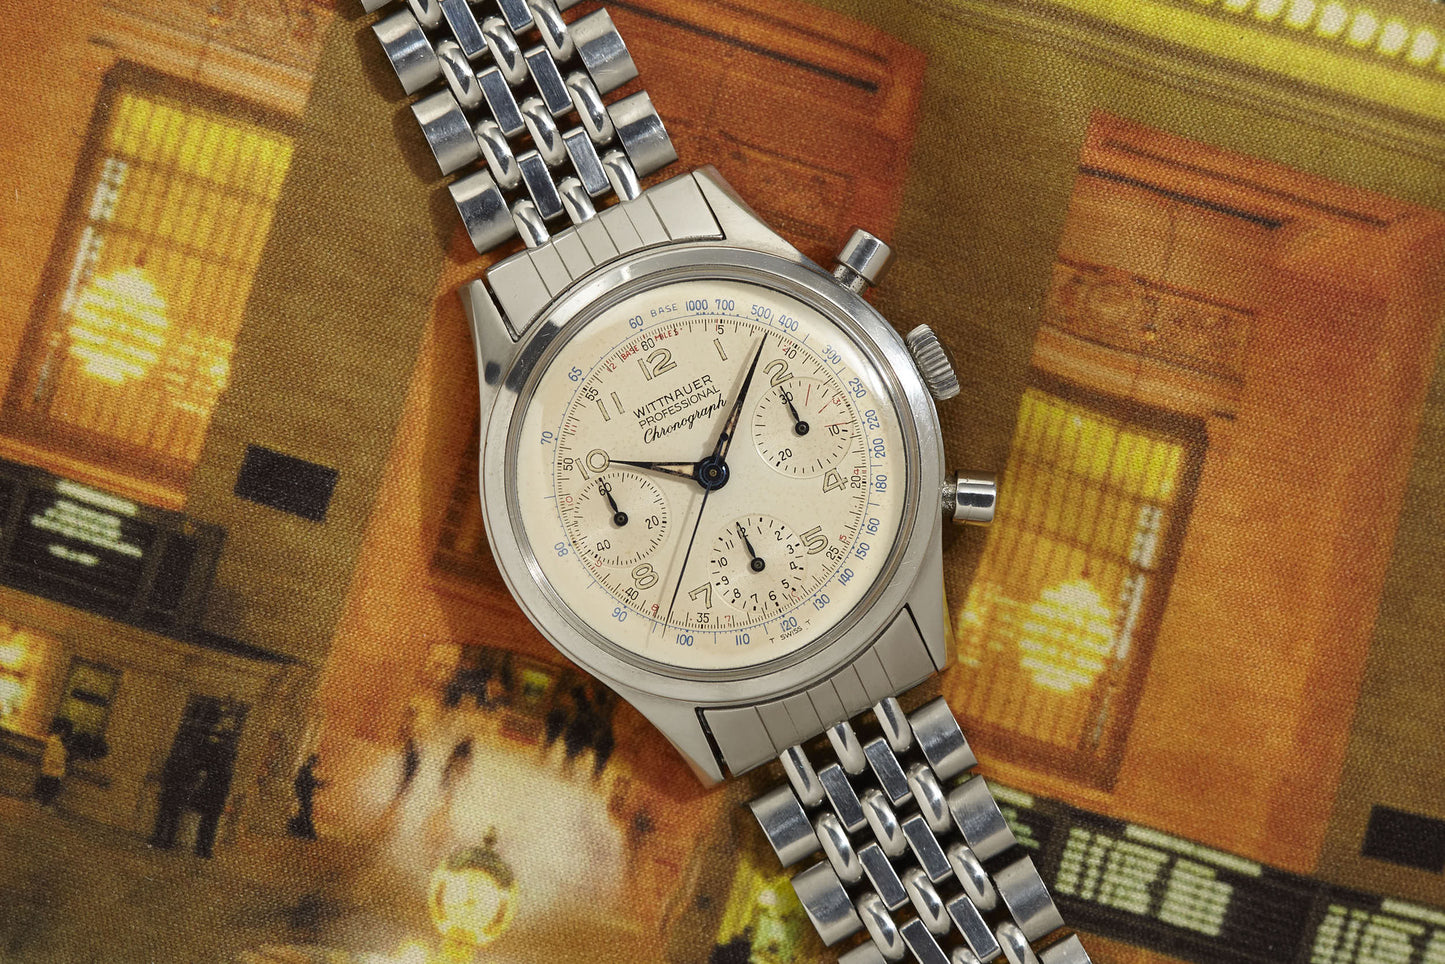 Wittnauer Professional Chronograph